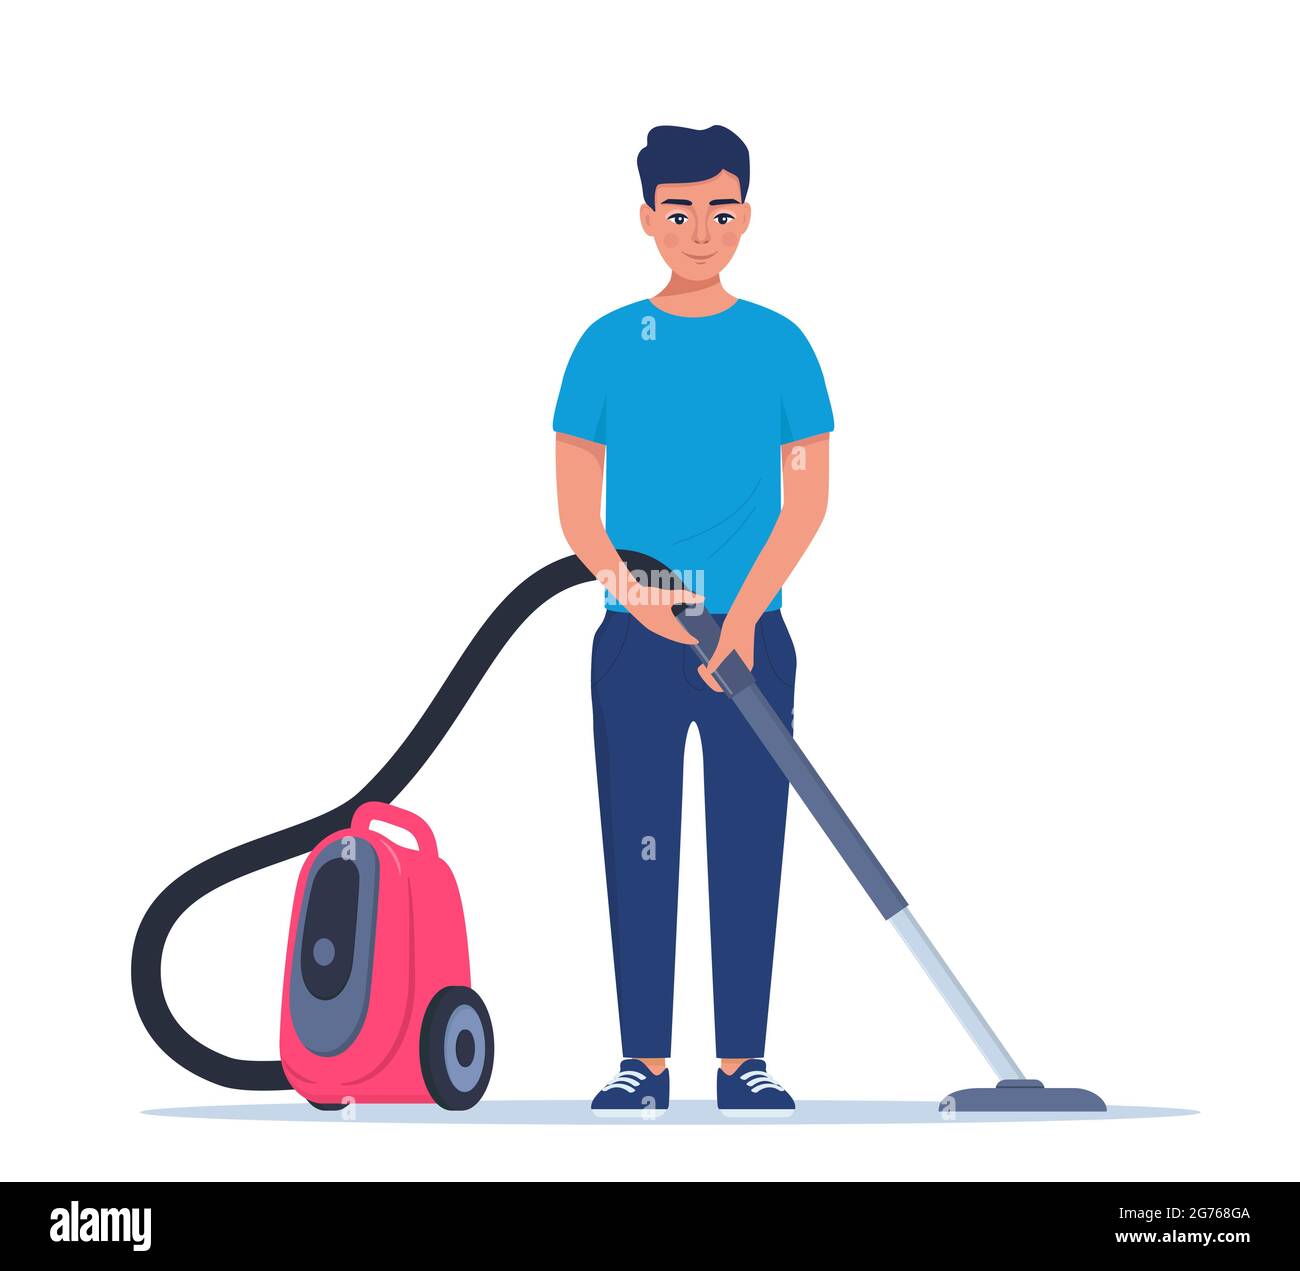 Man Enjoy Cleaning House with Vacuum Cleaner. Smiling man cleans the house. Man character vacuuming the floor. Cleaning service. Housekeeping. Vector Stock Vector